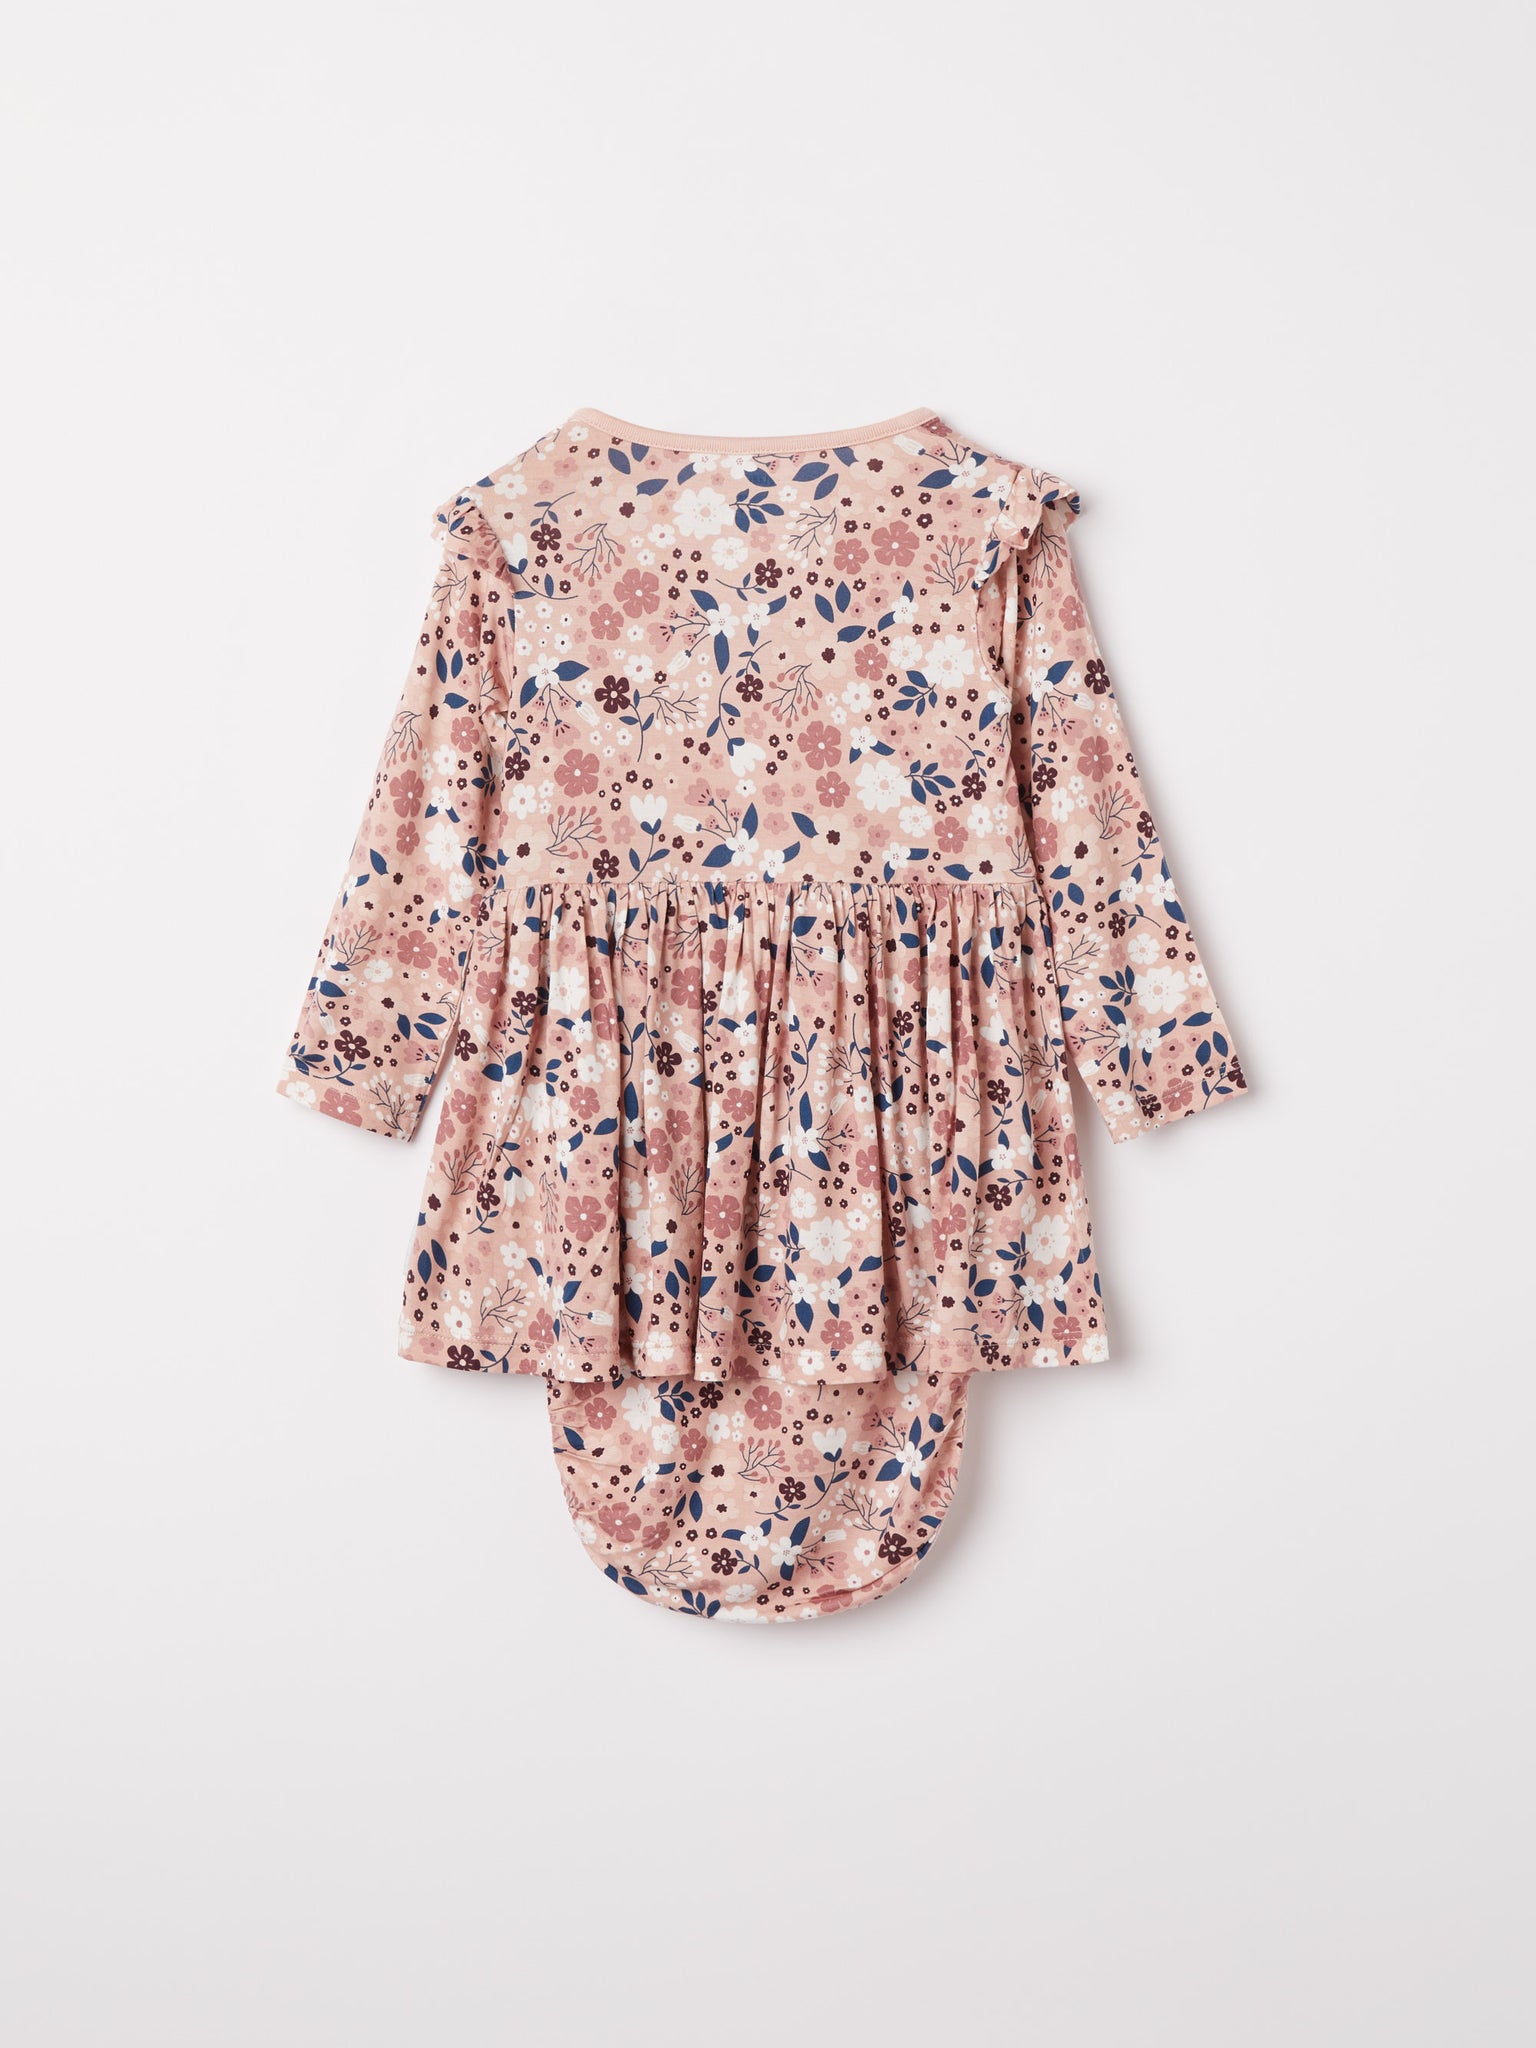 Floral Print Baby Bodysuit Dress from the Polarn O. Pyret baby collection. Clothes made using sustainably sourced materials.